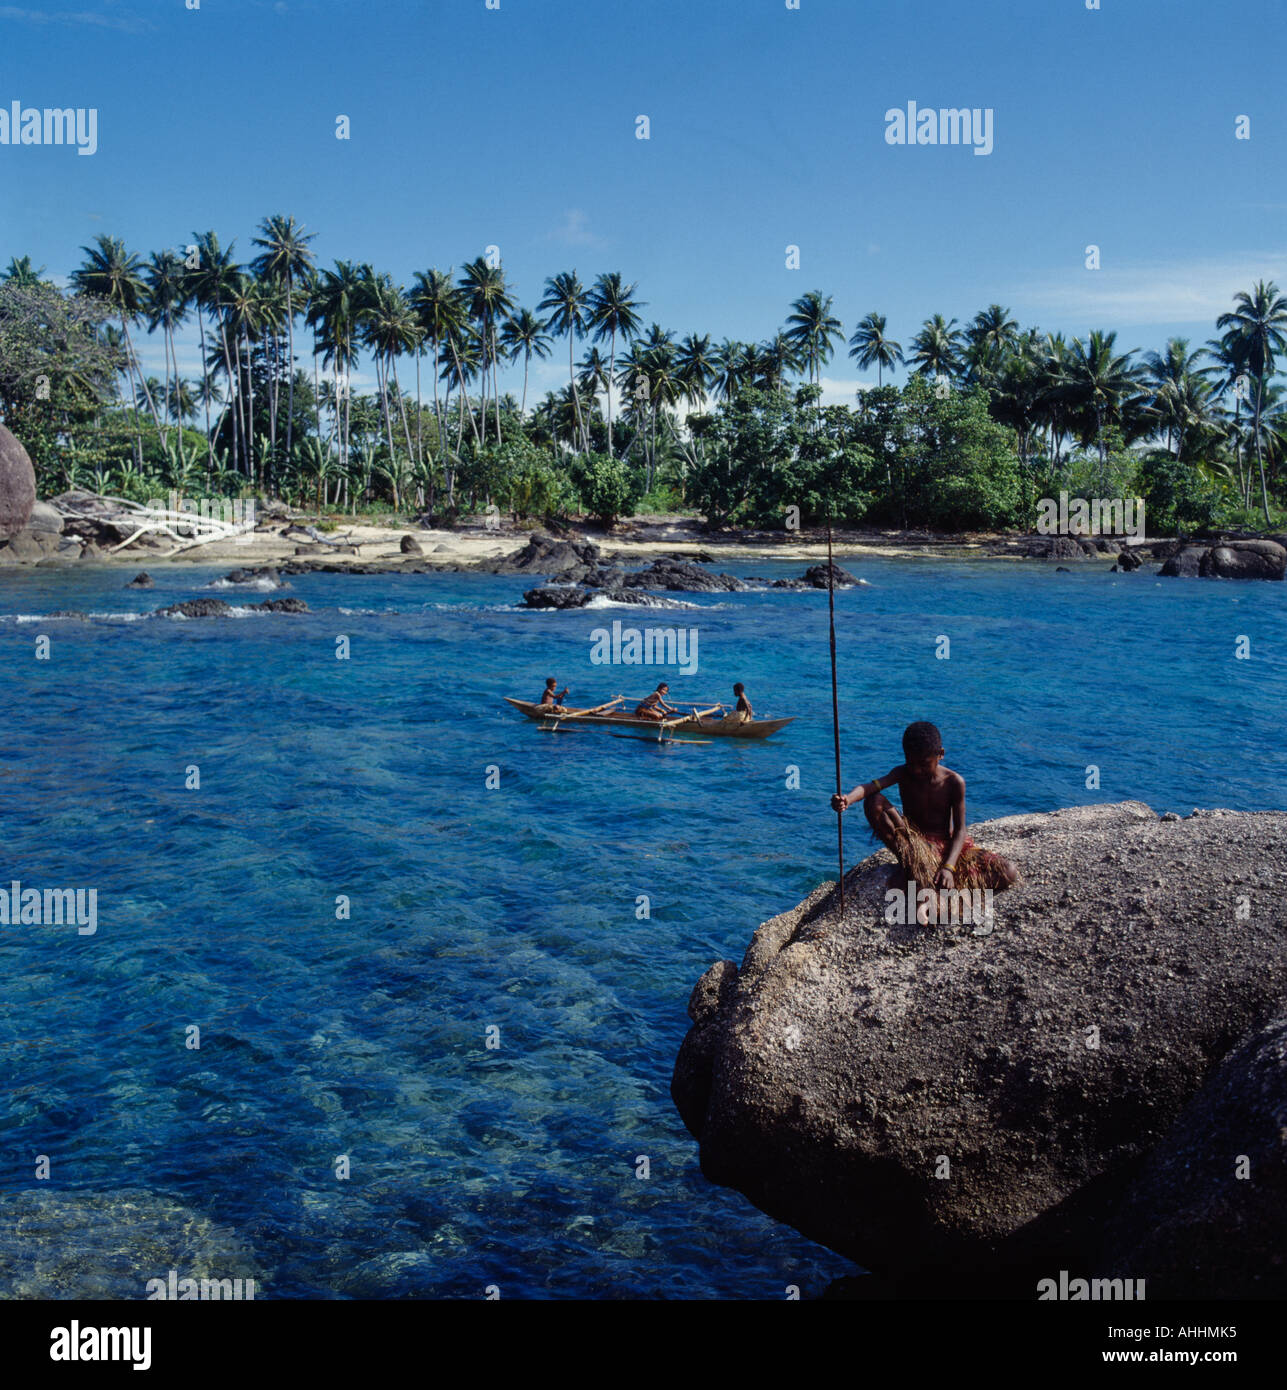 INDONESIA Asia Irian Jaya Sorong Children in outrigger canoe on clear blue water among rocks close to coconut tree lined shore Stock Photo